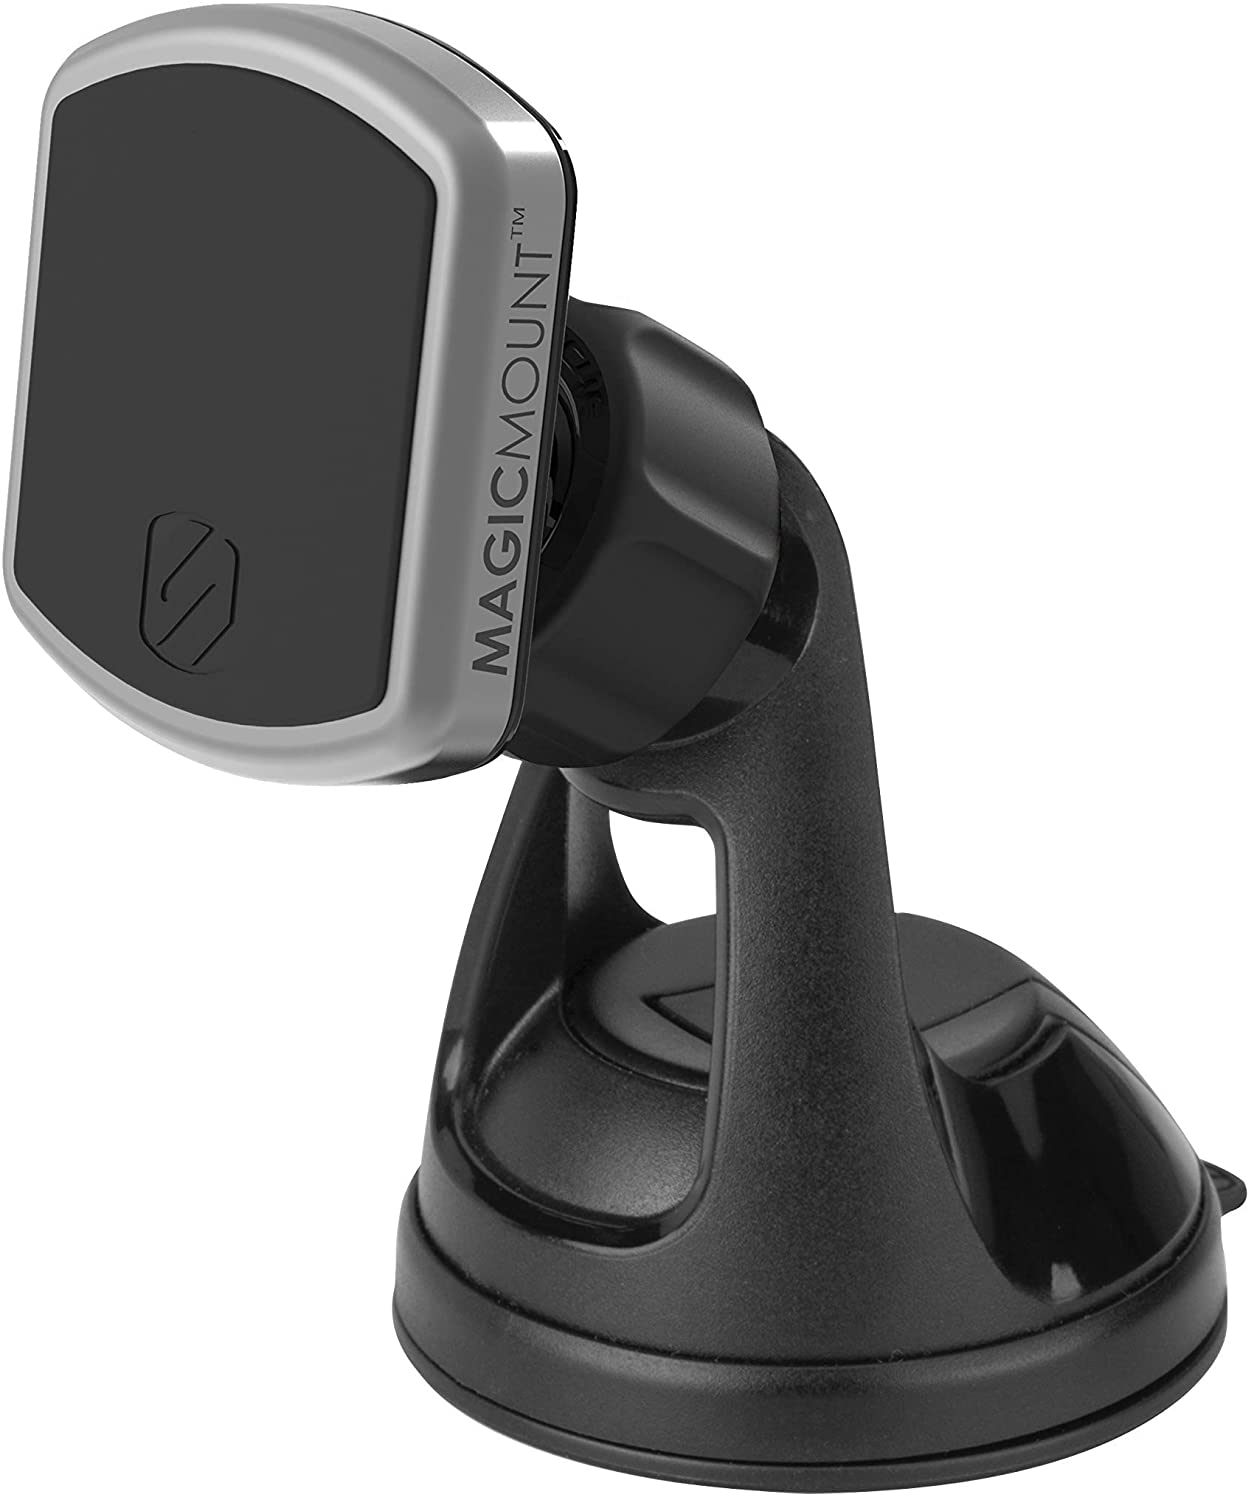 SCOSCHE MPWD2-XTPR Pro MagicMount Magnetic Suction Cup Mount for Mobile Devices, Black